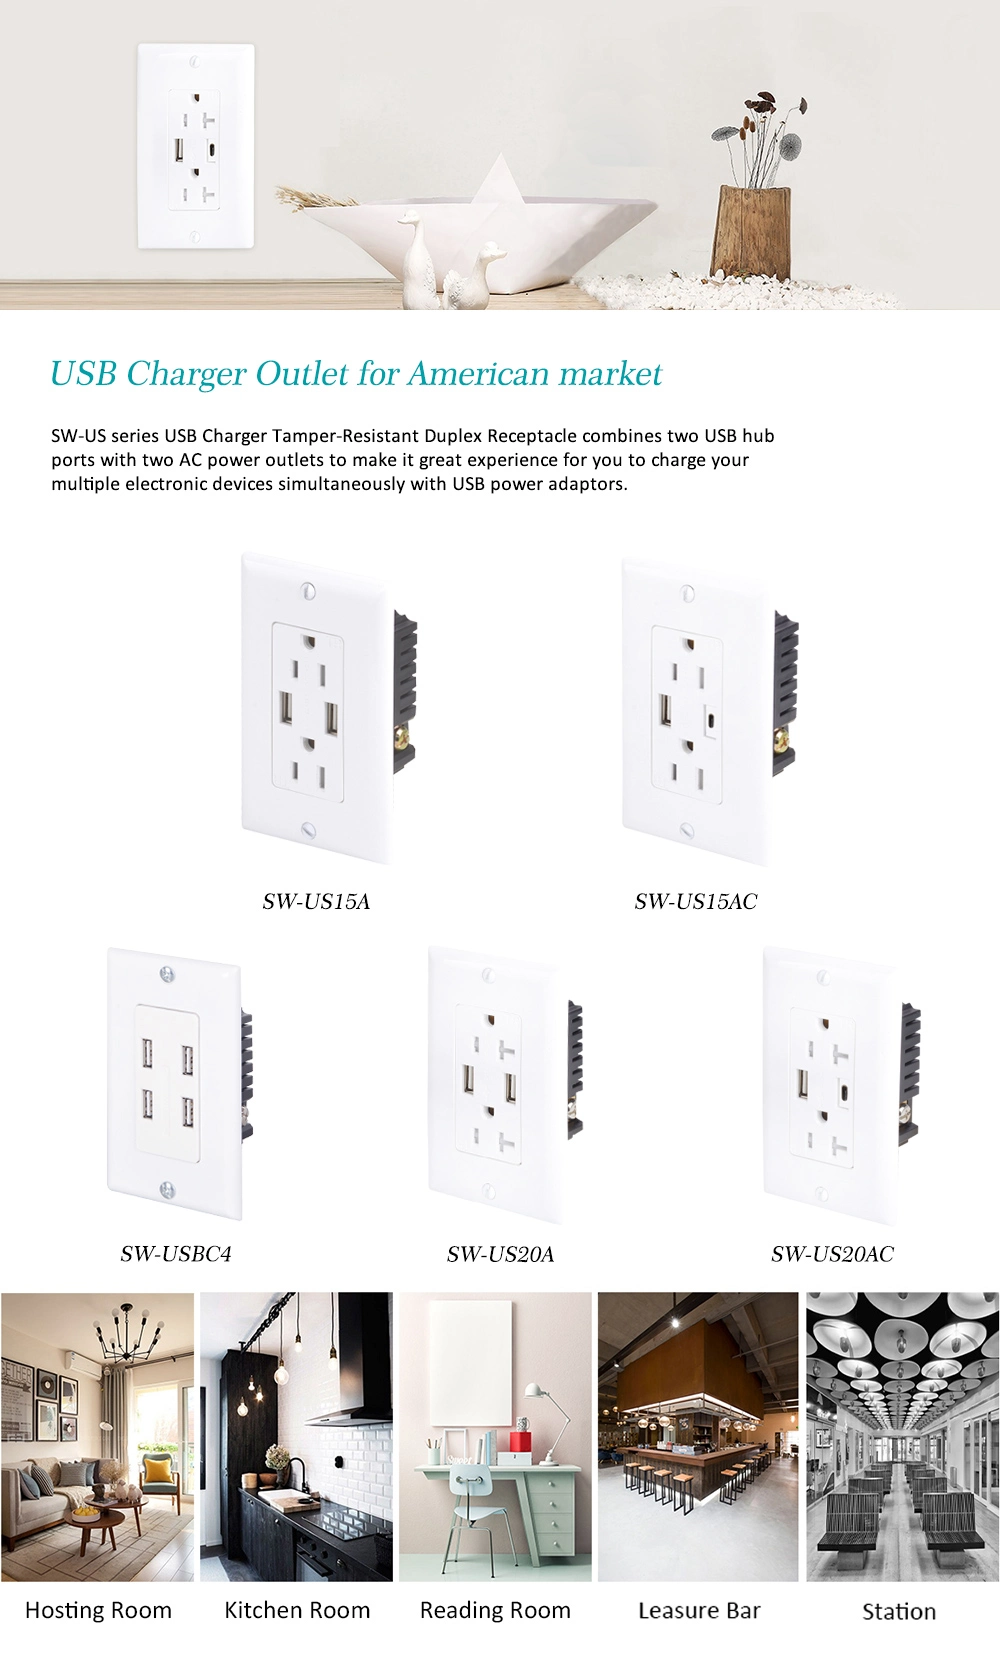 2.1 AMP Dual Smart High Speed Wall Mount Charger USB Outlet, 15A Tamper Resistant Duplex Receptacle, Child Proof Safety, Wall Plate with USB Screw